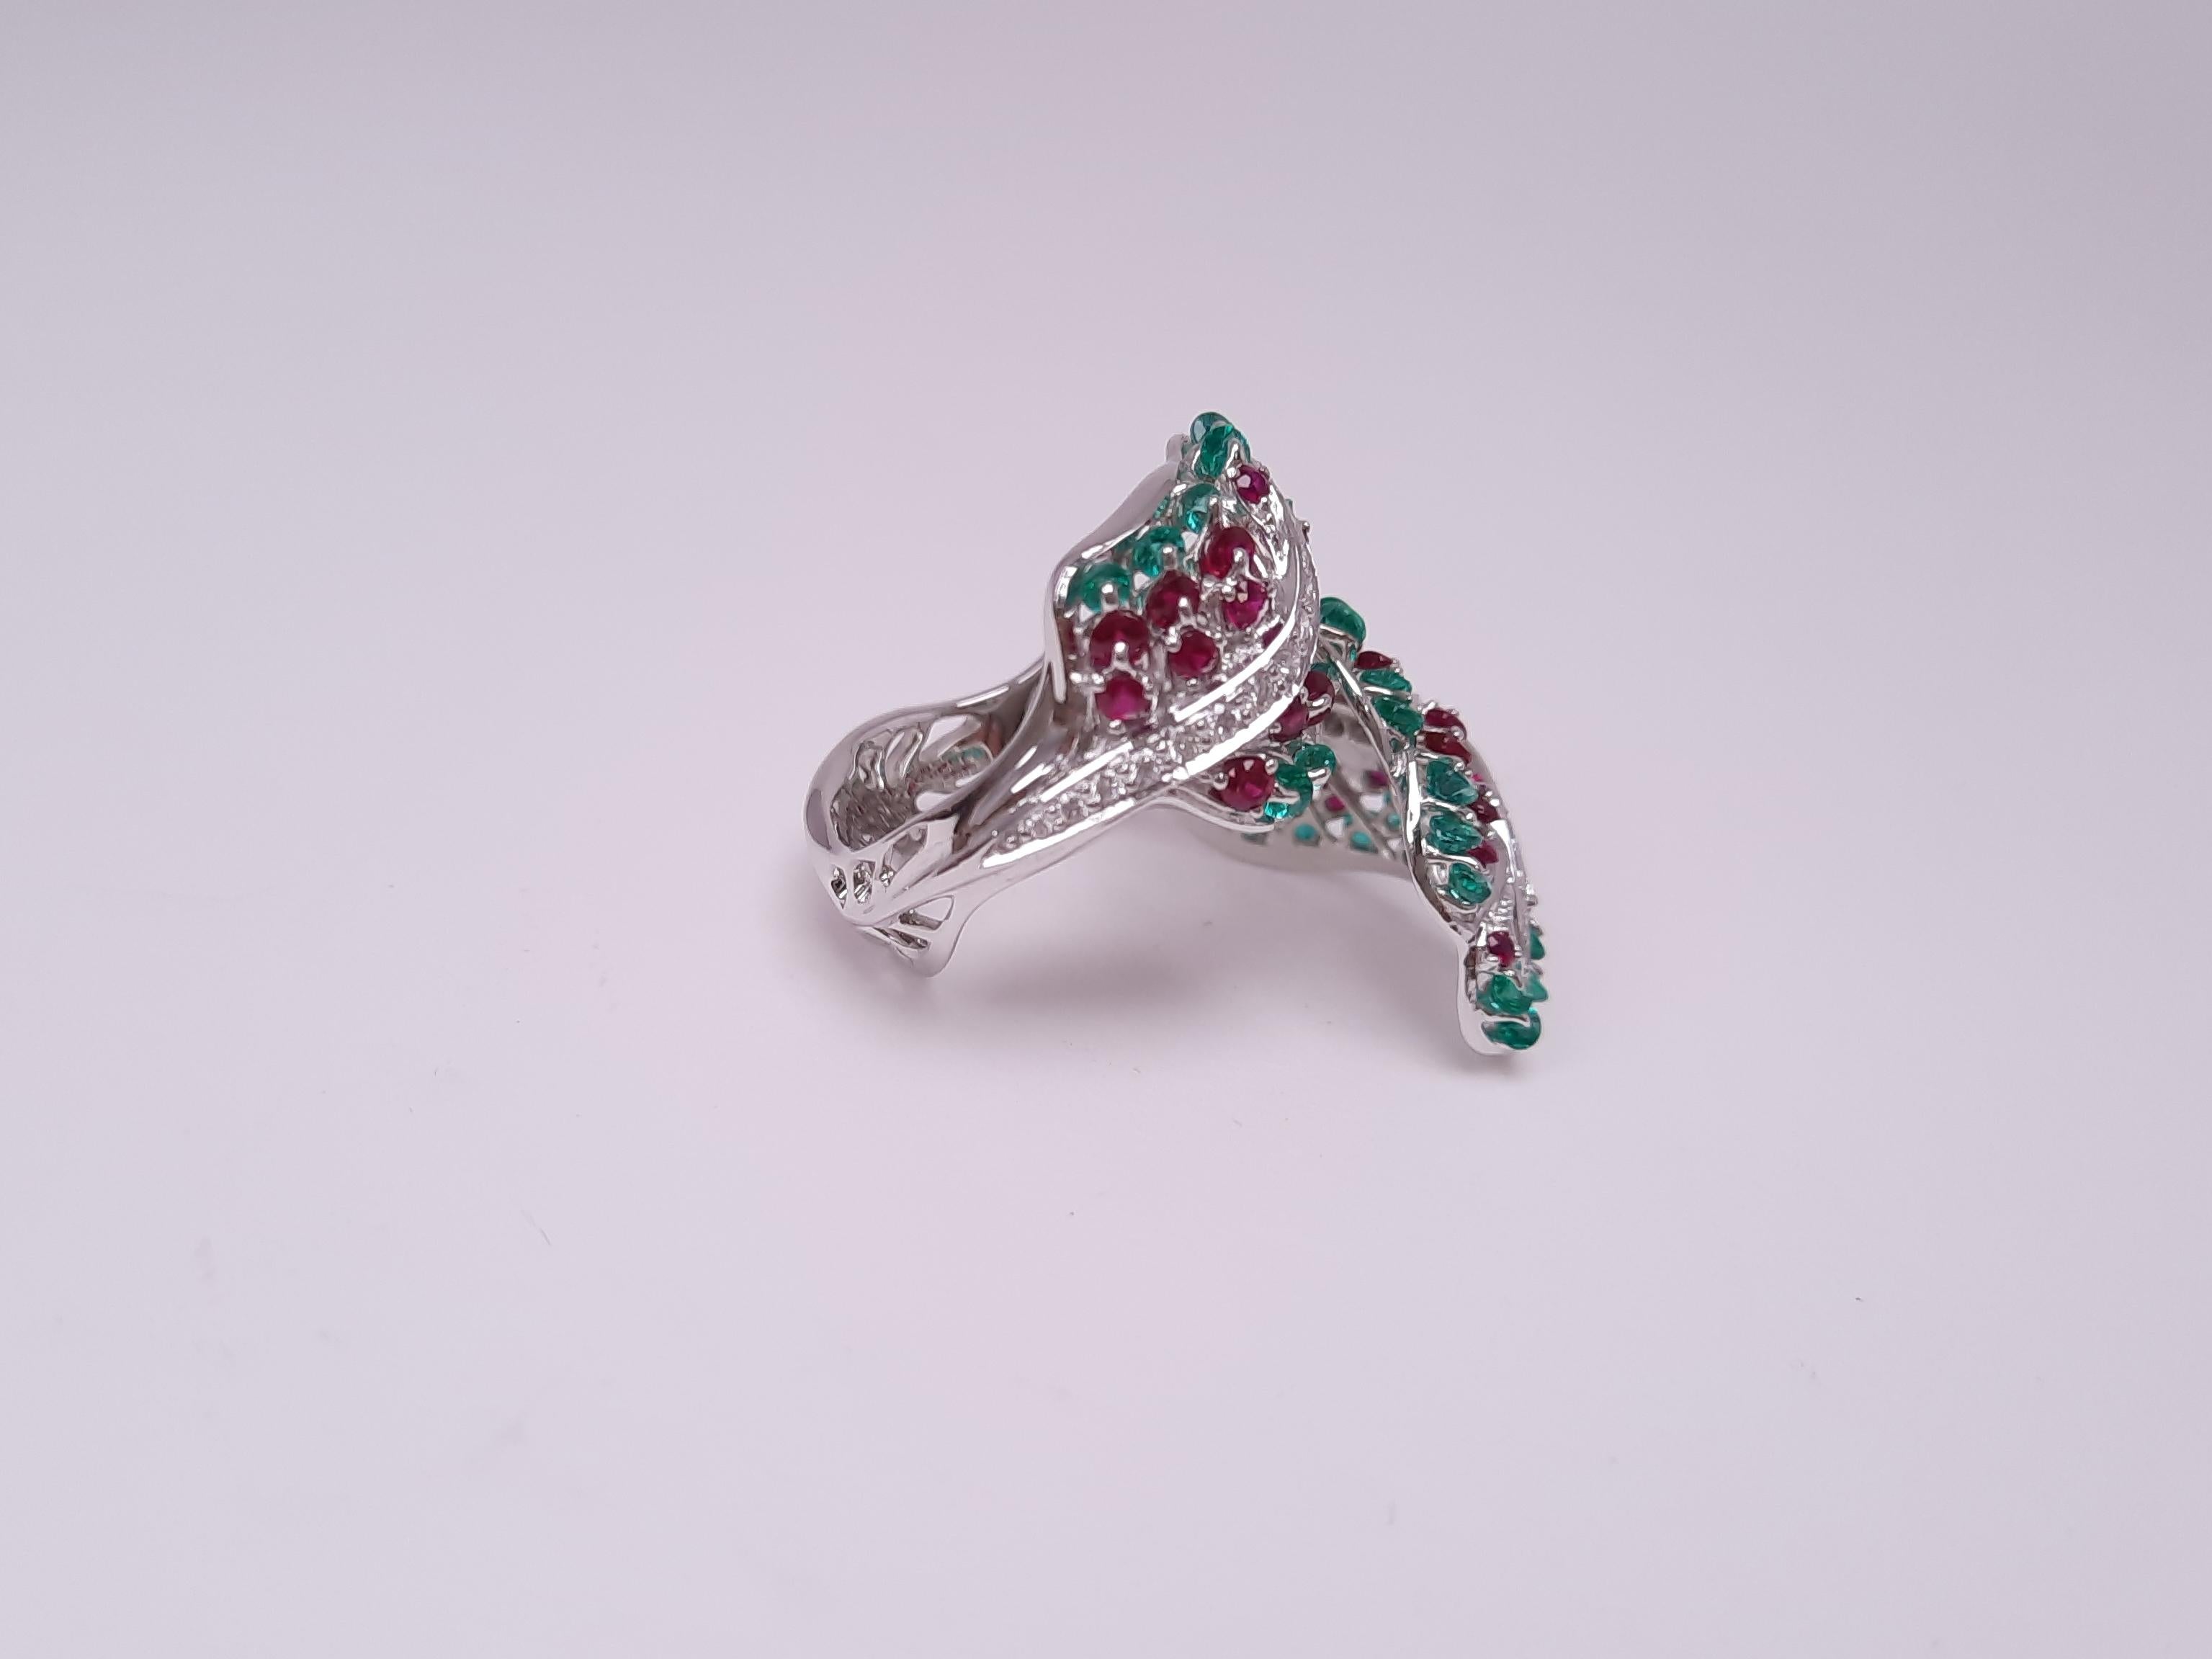 A fashionable yet graceful angel wing ring created by Viktor Moiseikin is  embedded with high quality rubies, emerald and a diamond belt gives a little accent. 

The stones are mounted in the innovative jewellery setting 